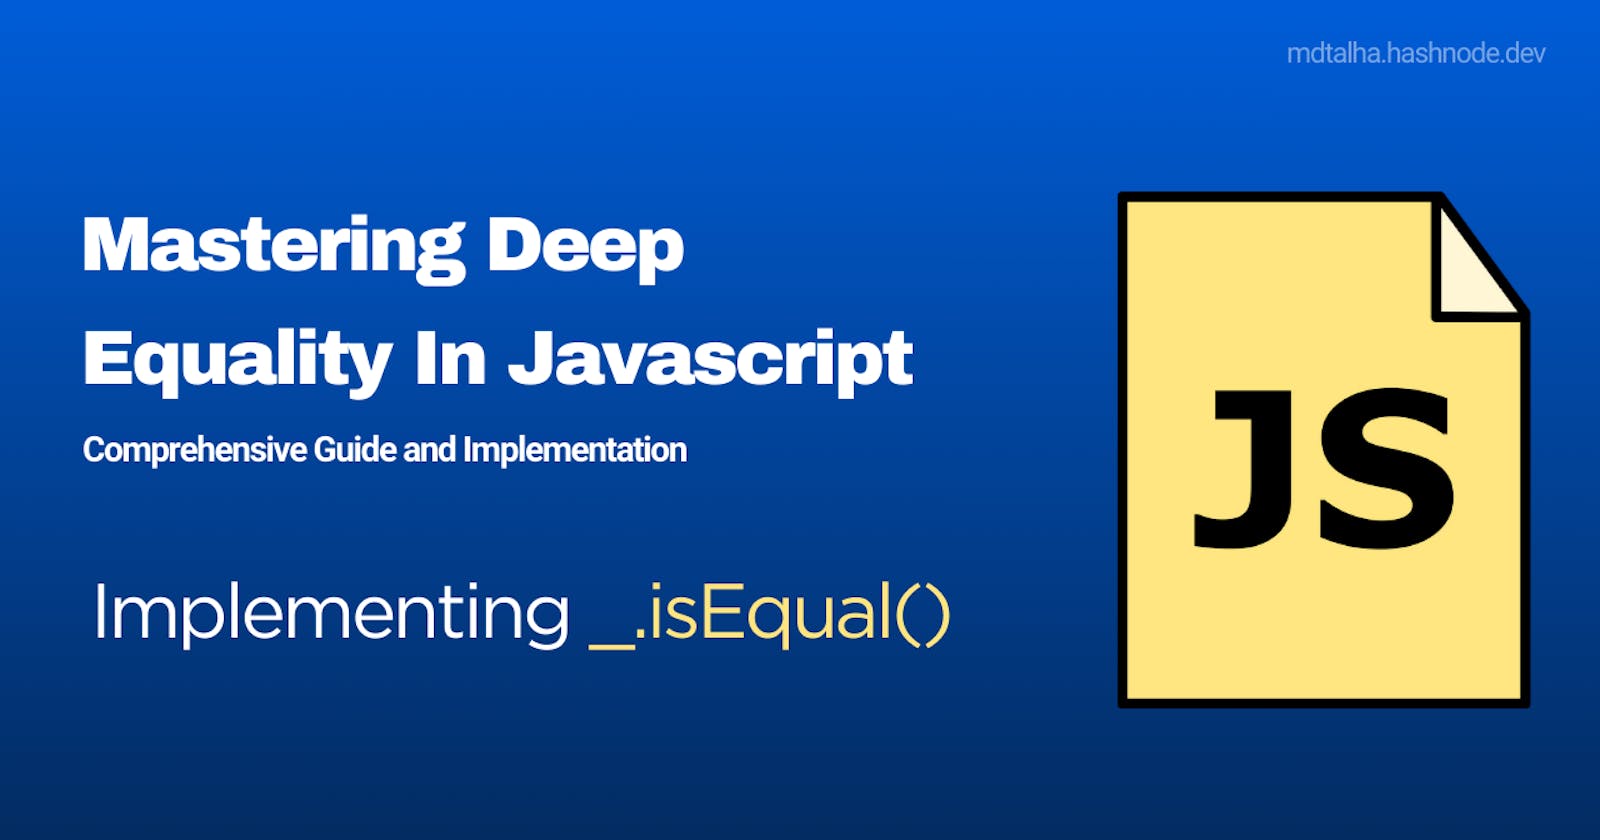 Mastering Deep Equality in JavaScript: A Comprehensive Guide and Implementation